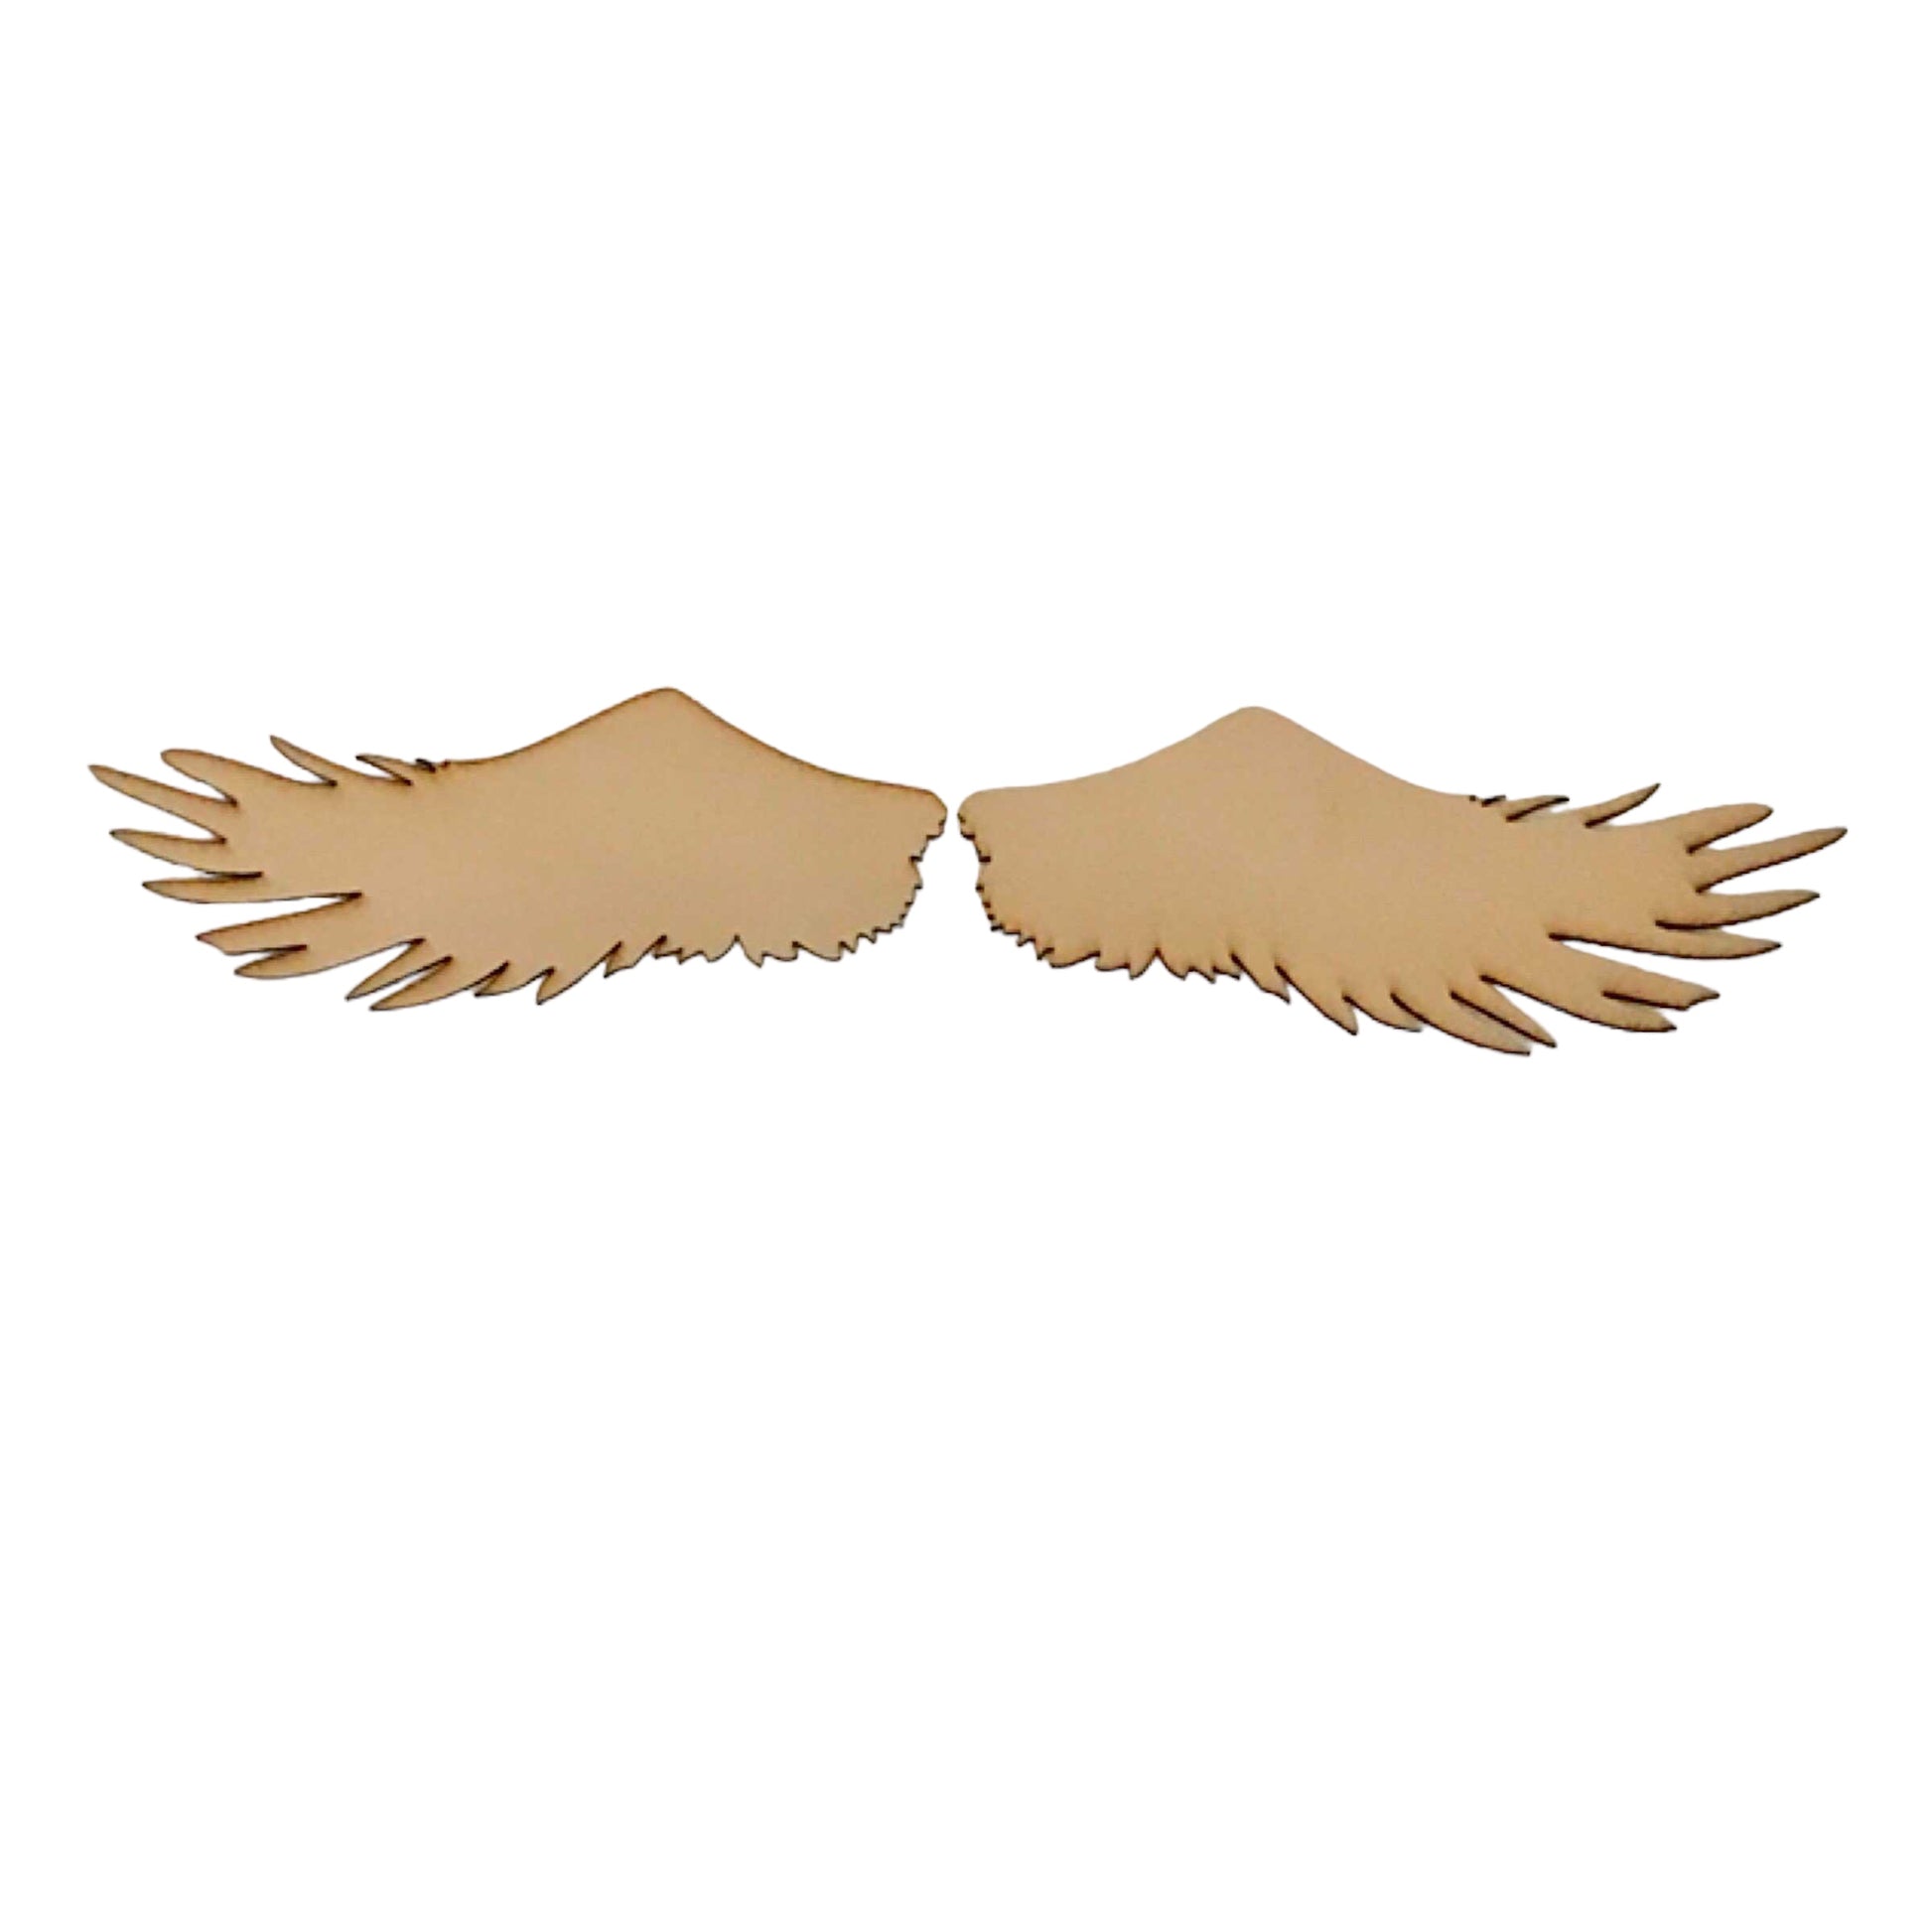 Angel Flying Wings MDF Shape DIY Raw Cut Out Art Craft Decor - The Renmy Store Homewares & Gifts 